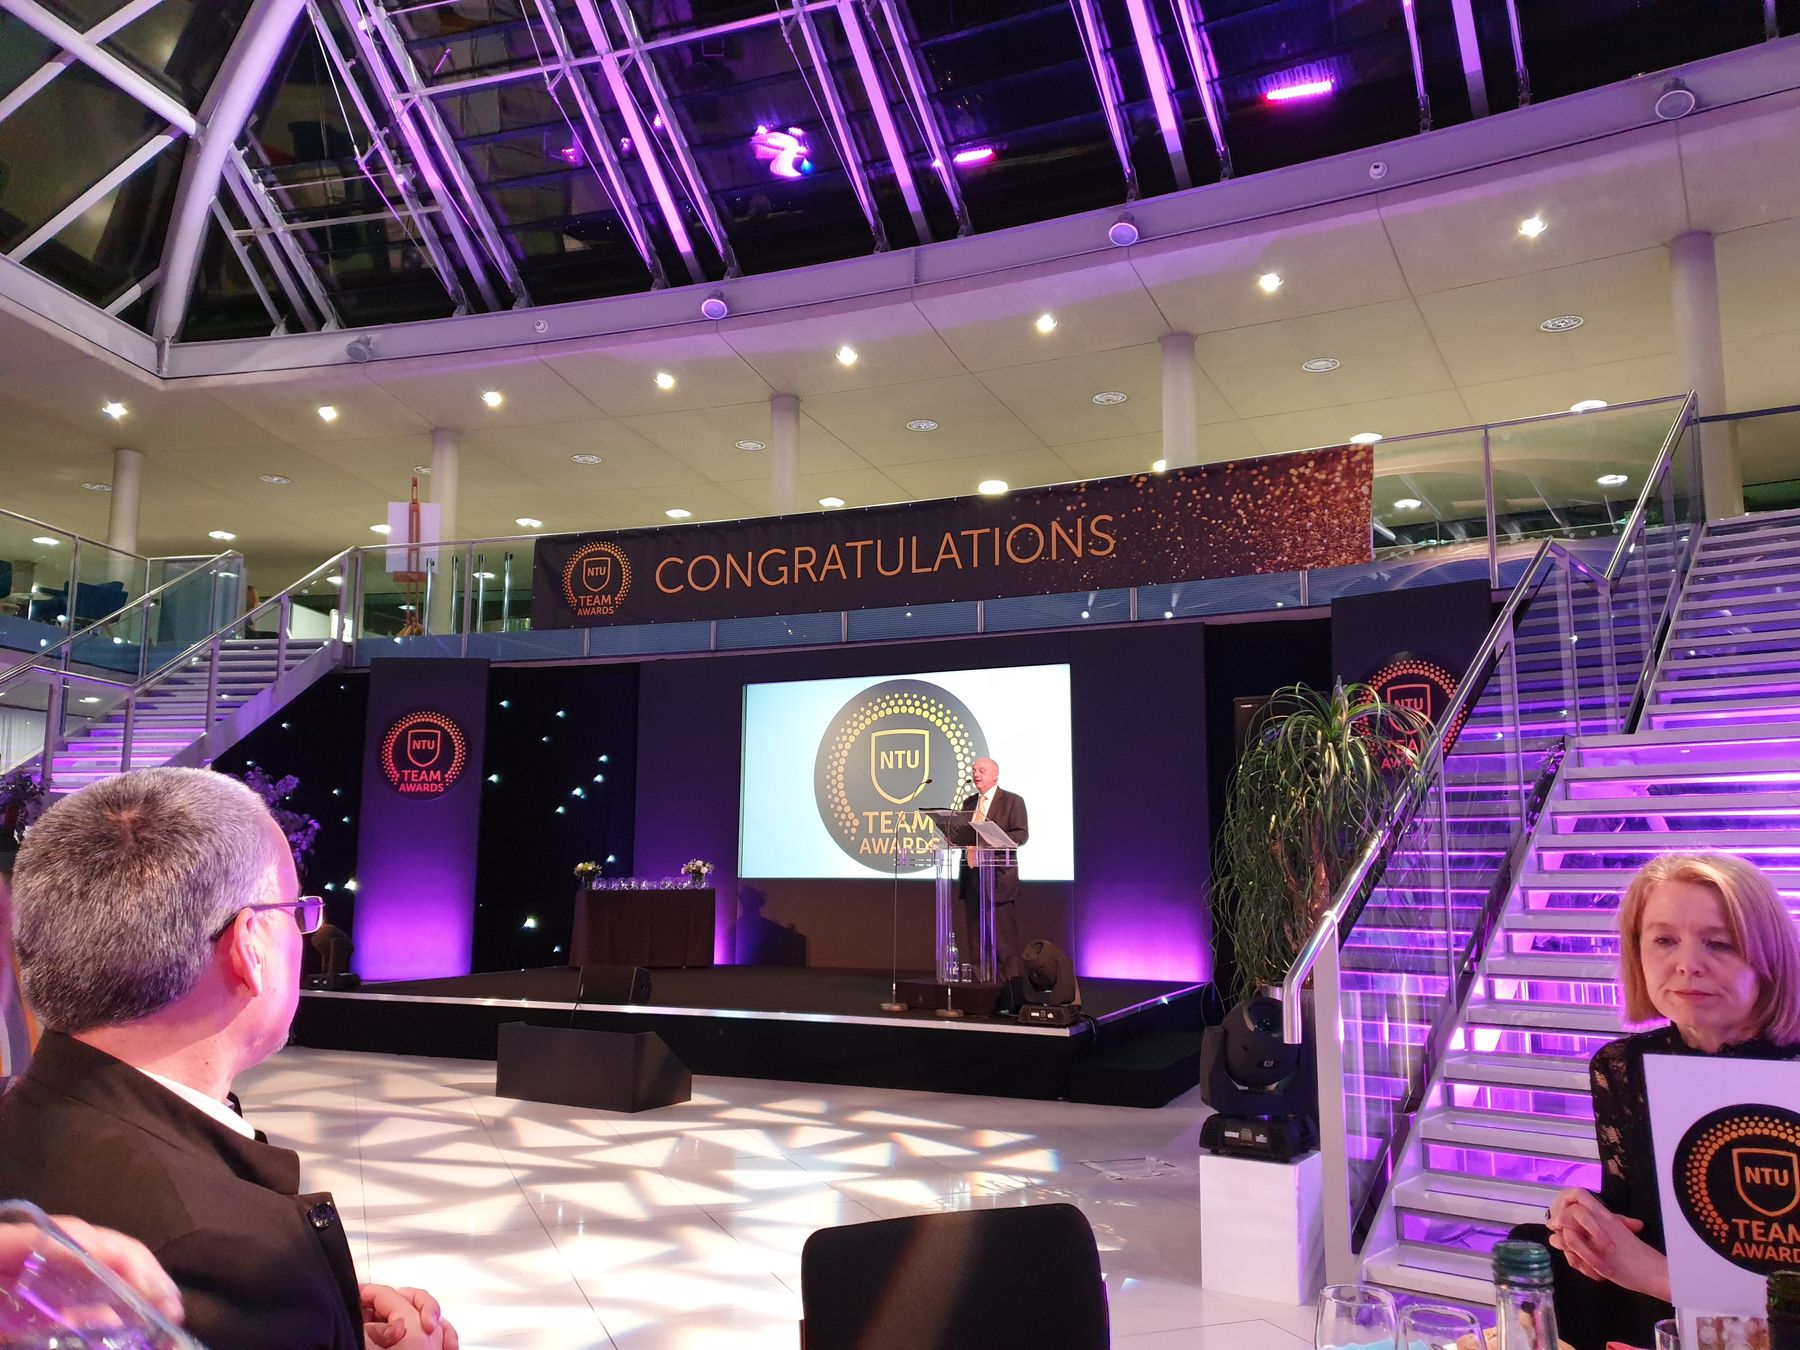 The stage at the NTU Team Awards